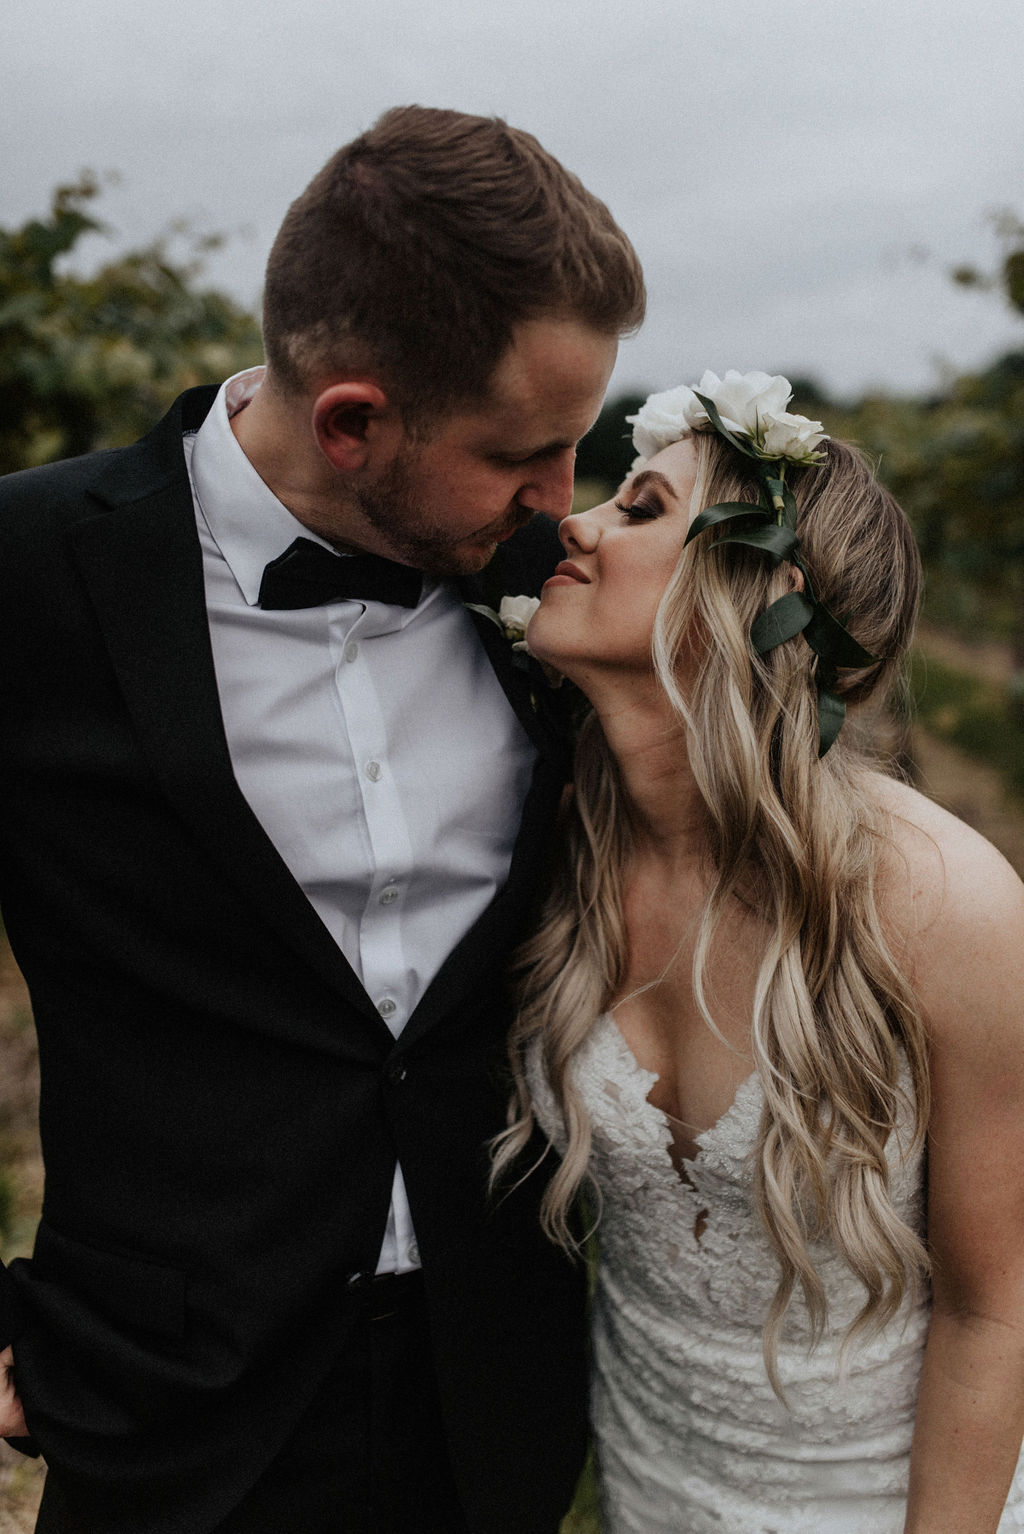 A couple kissing in the vineyard after their wedding